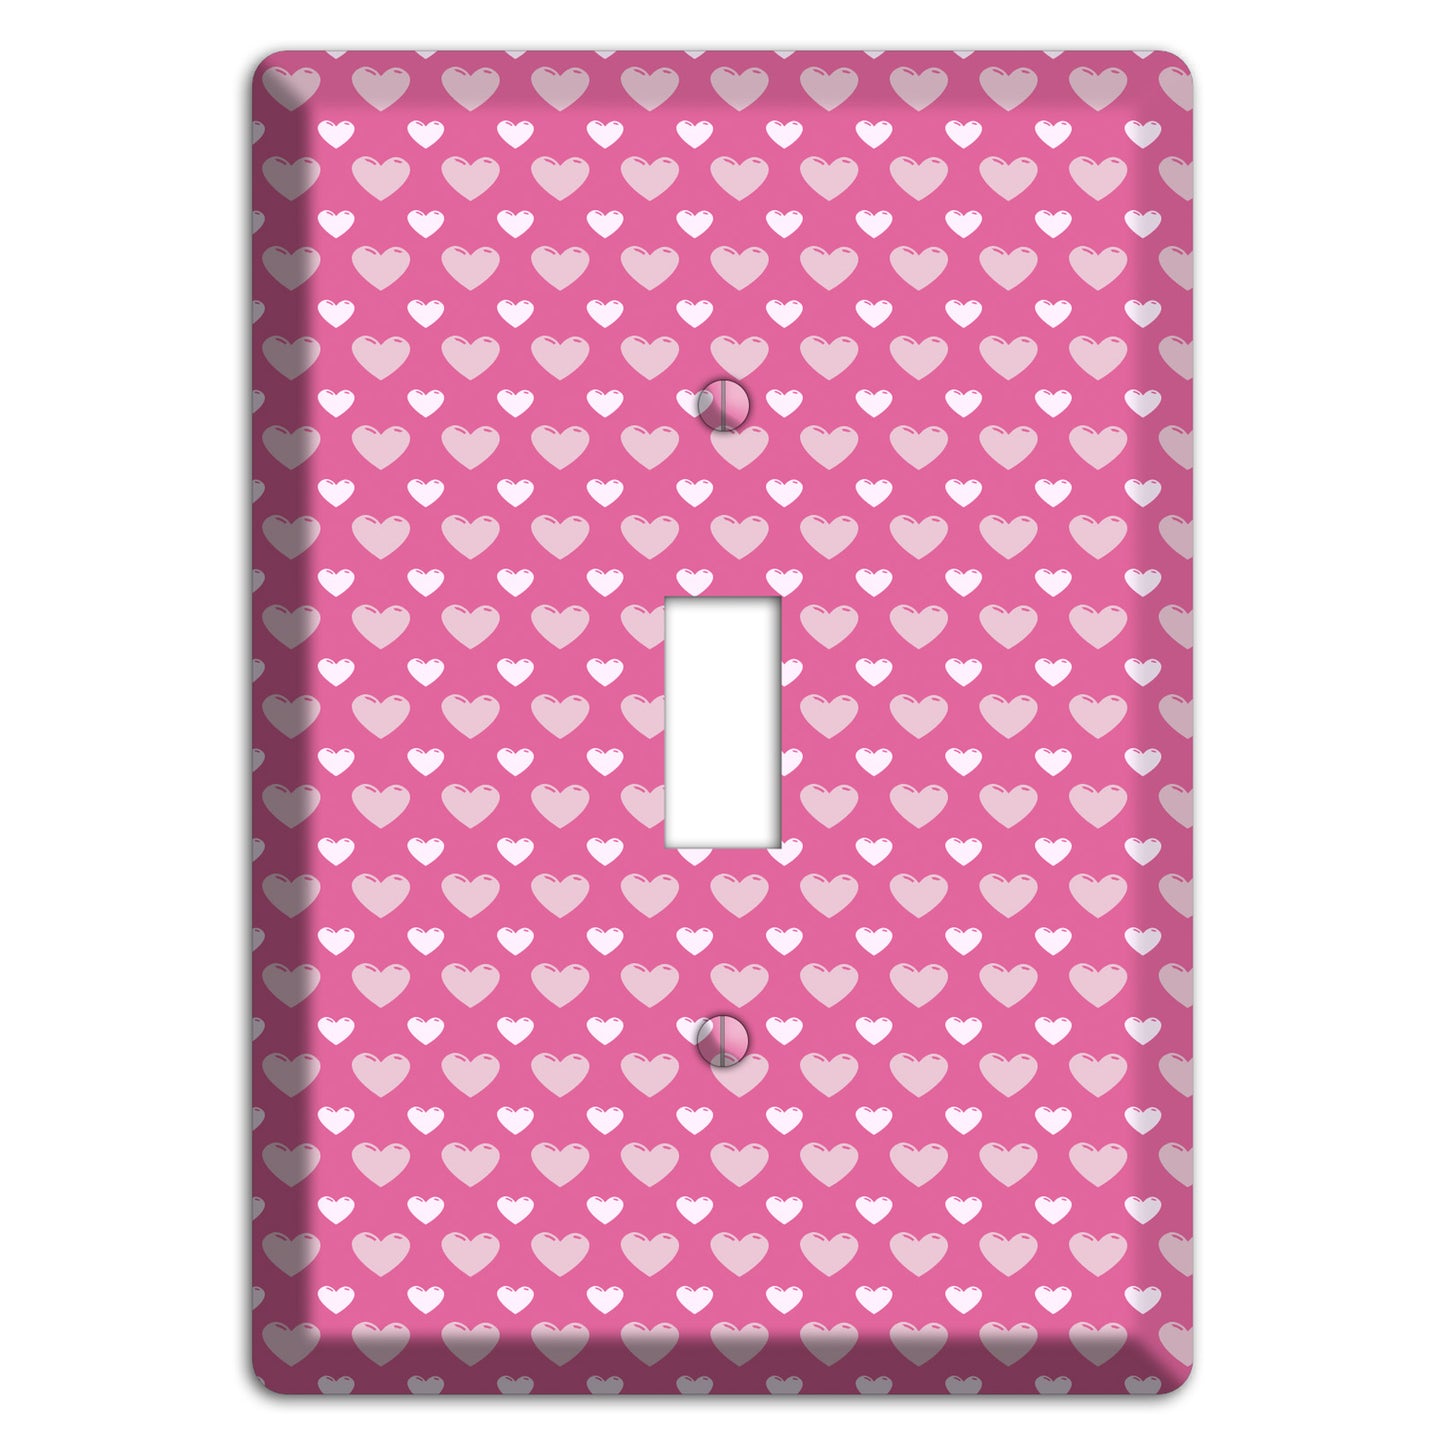 Tiled Small Hearts Cover Plates